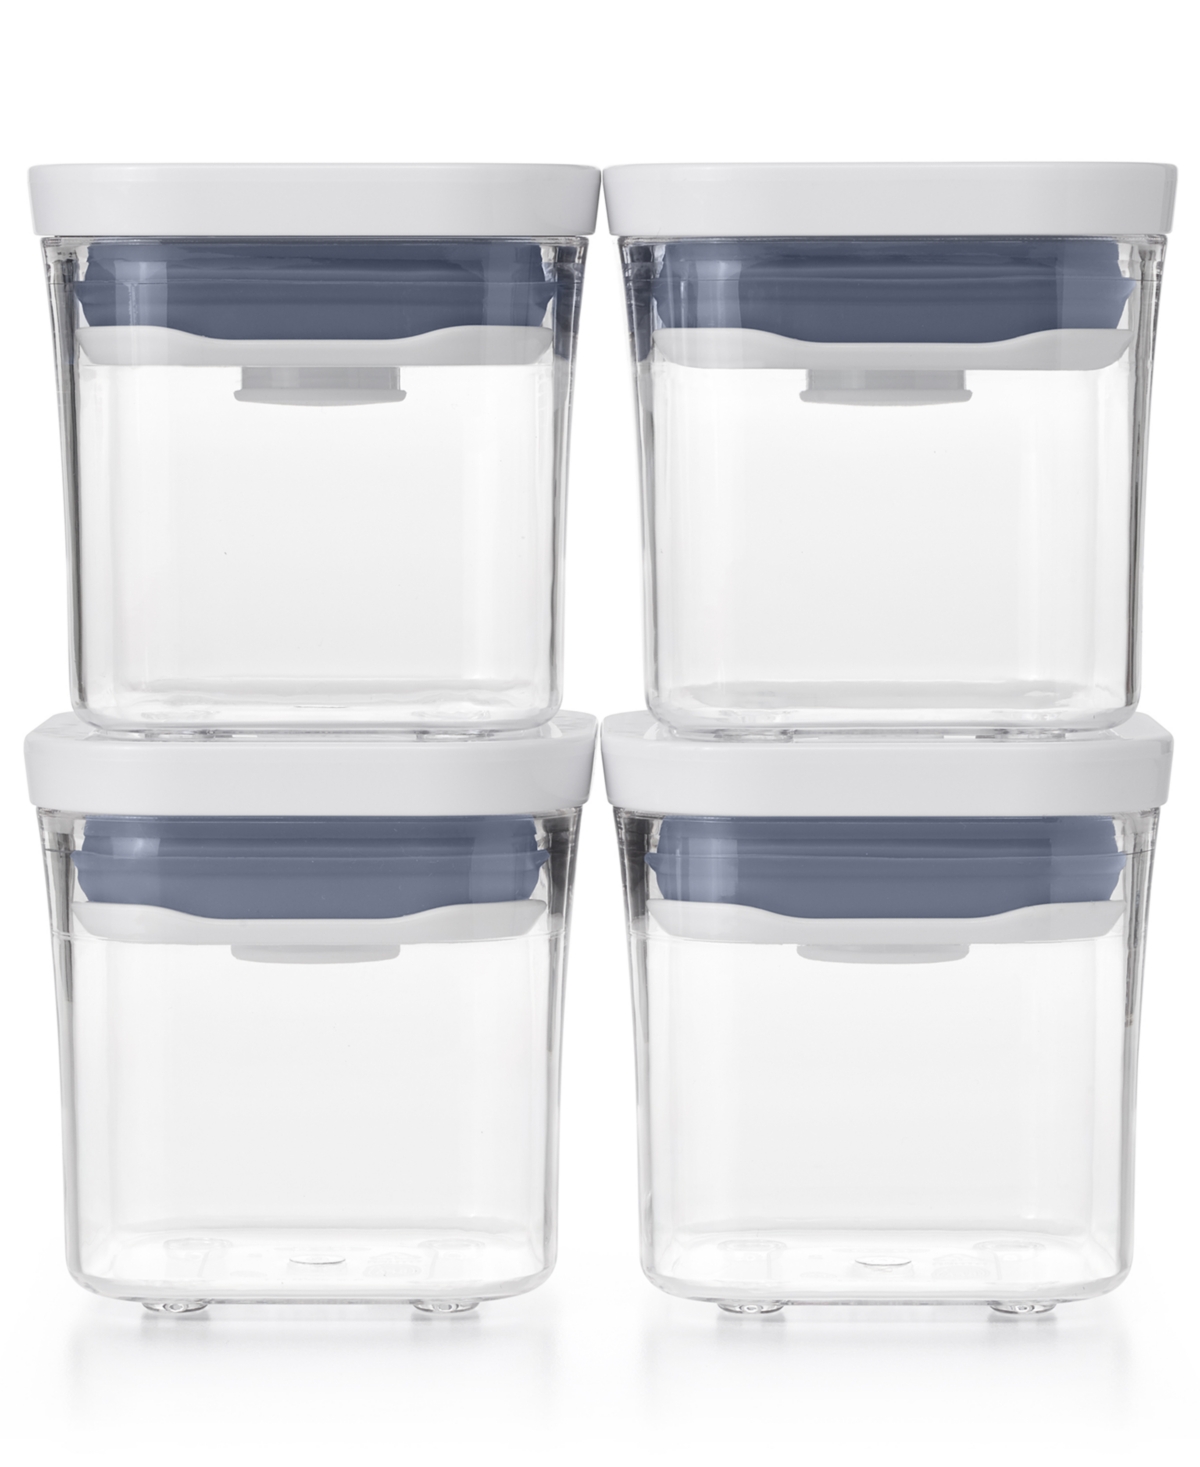 Pop 4-Pc. Mini Food Storage Container Set - Clear